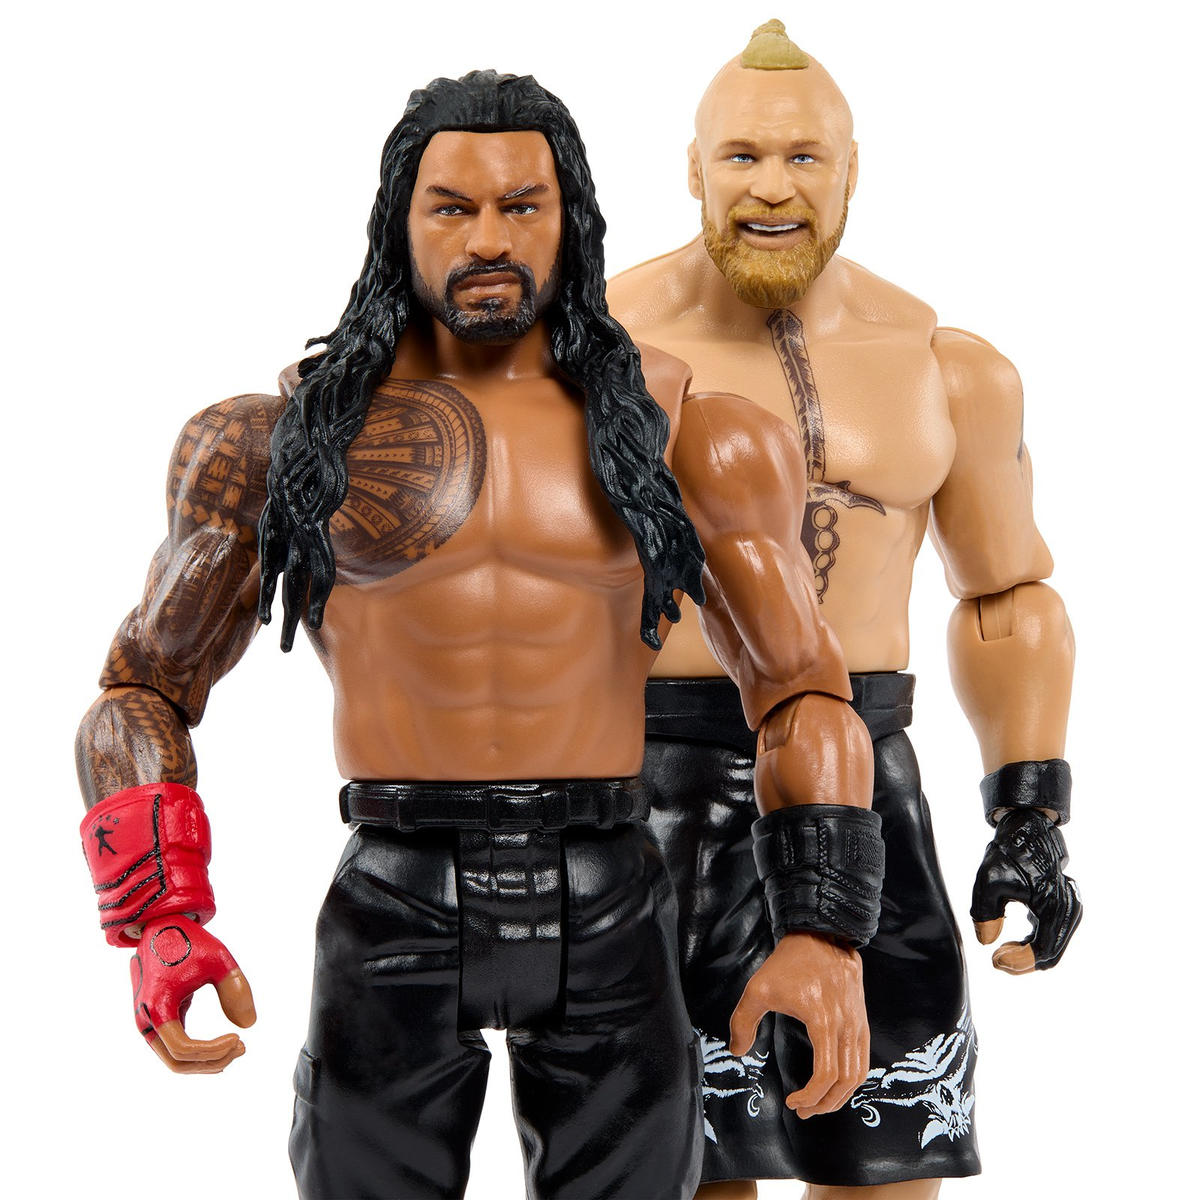 2022 WWE Mattel Basic Championship Rivals With WWE Championship Belt [With Roman Reigns & Brock Lesnar]